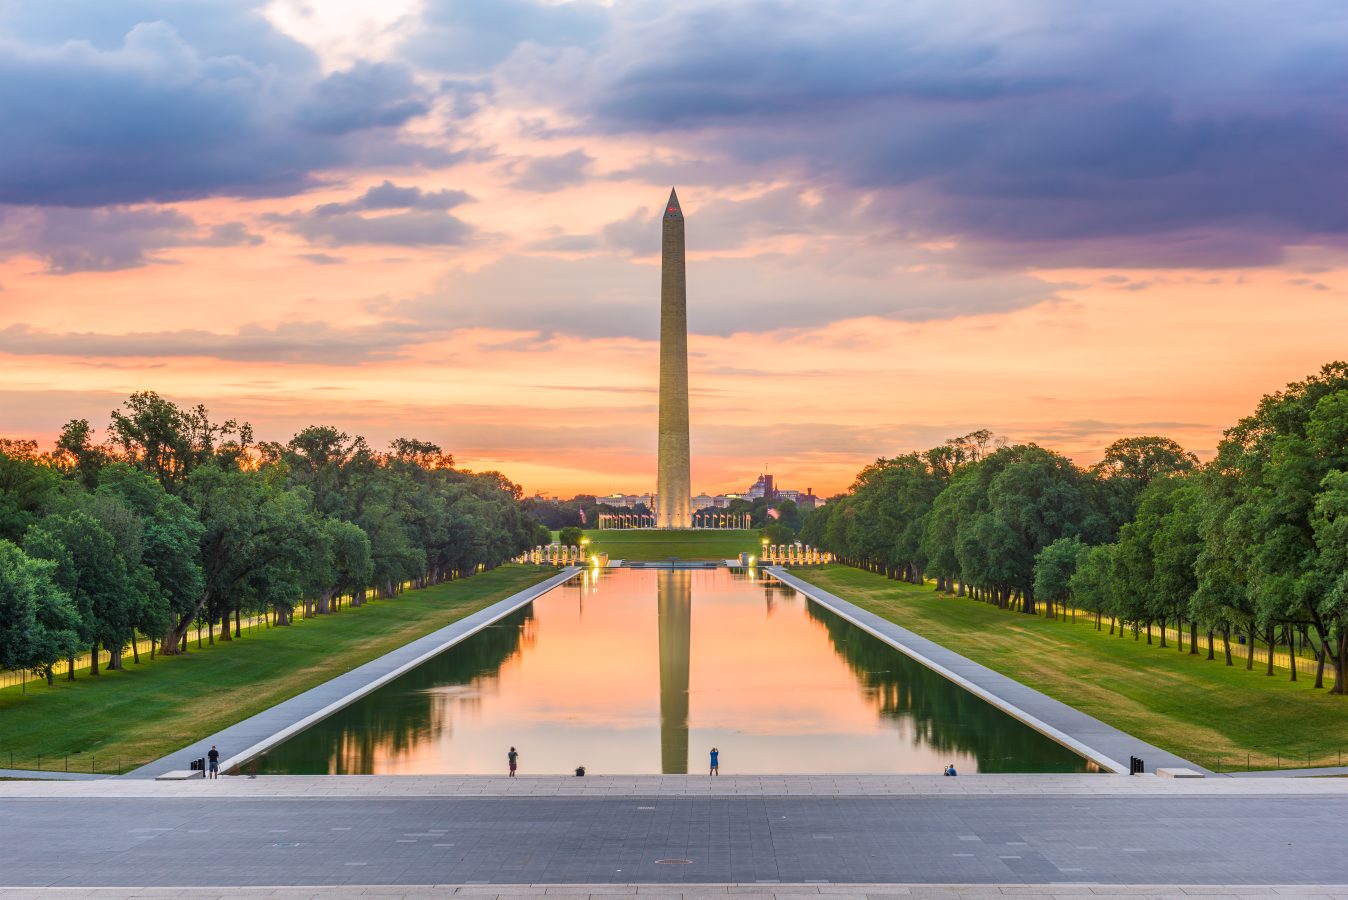 Early morning in summer in Washington DC, overlooking the Reflecting Pool and the Washington Monument.